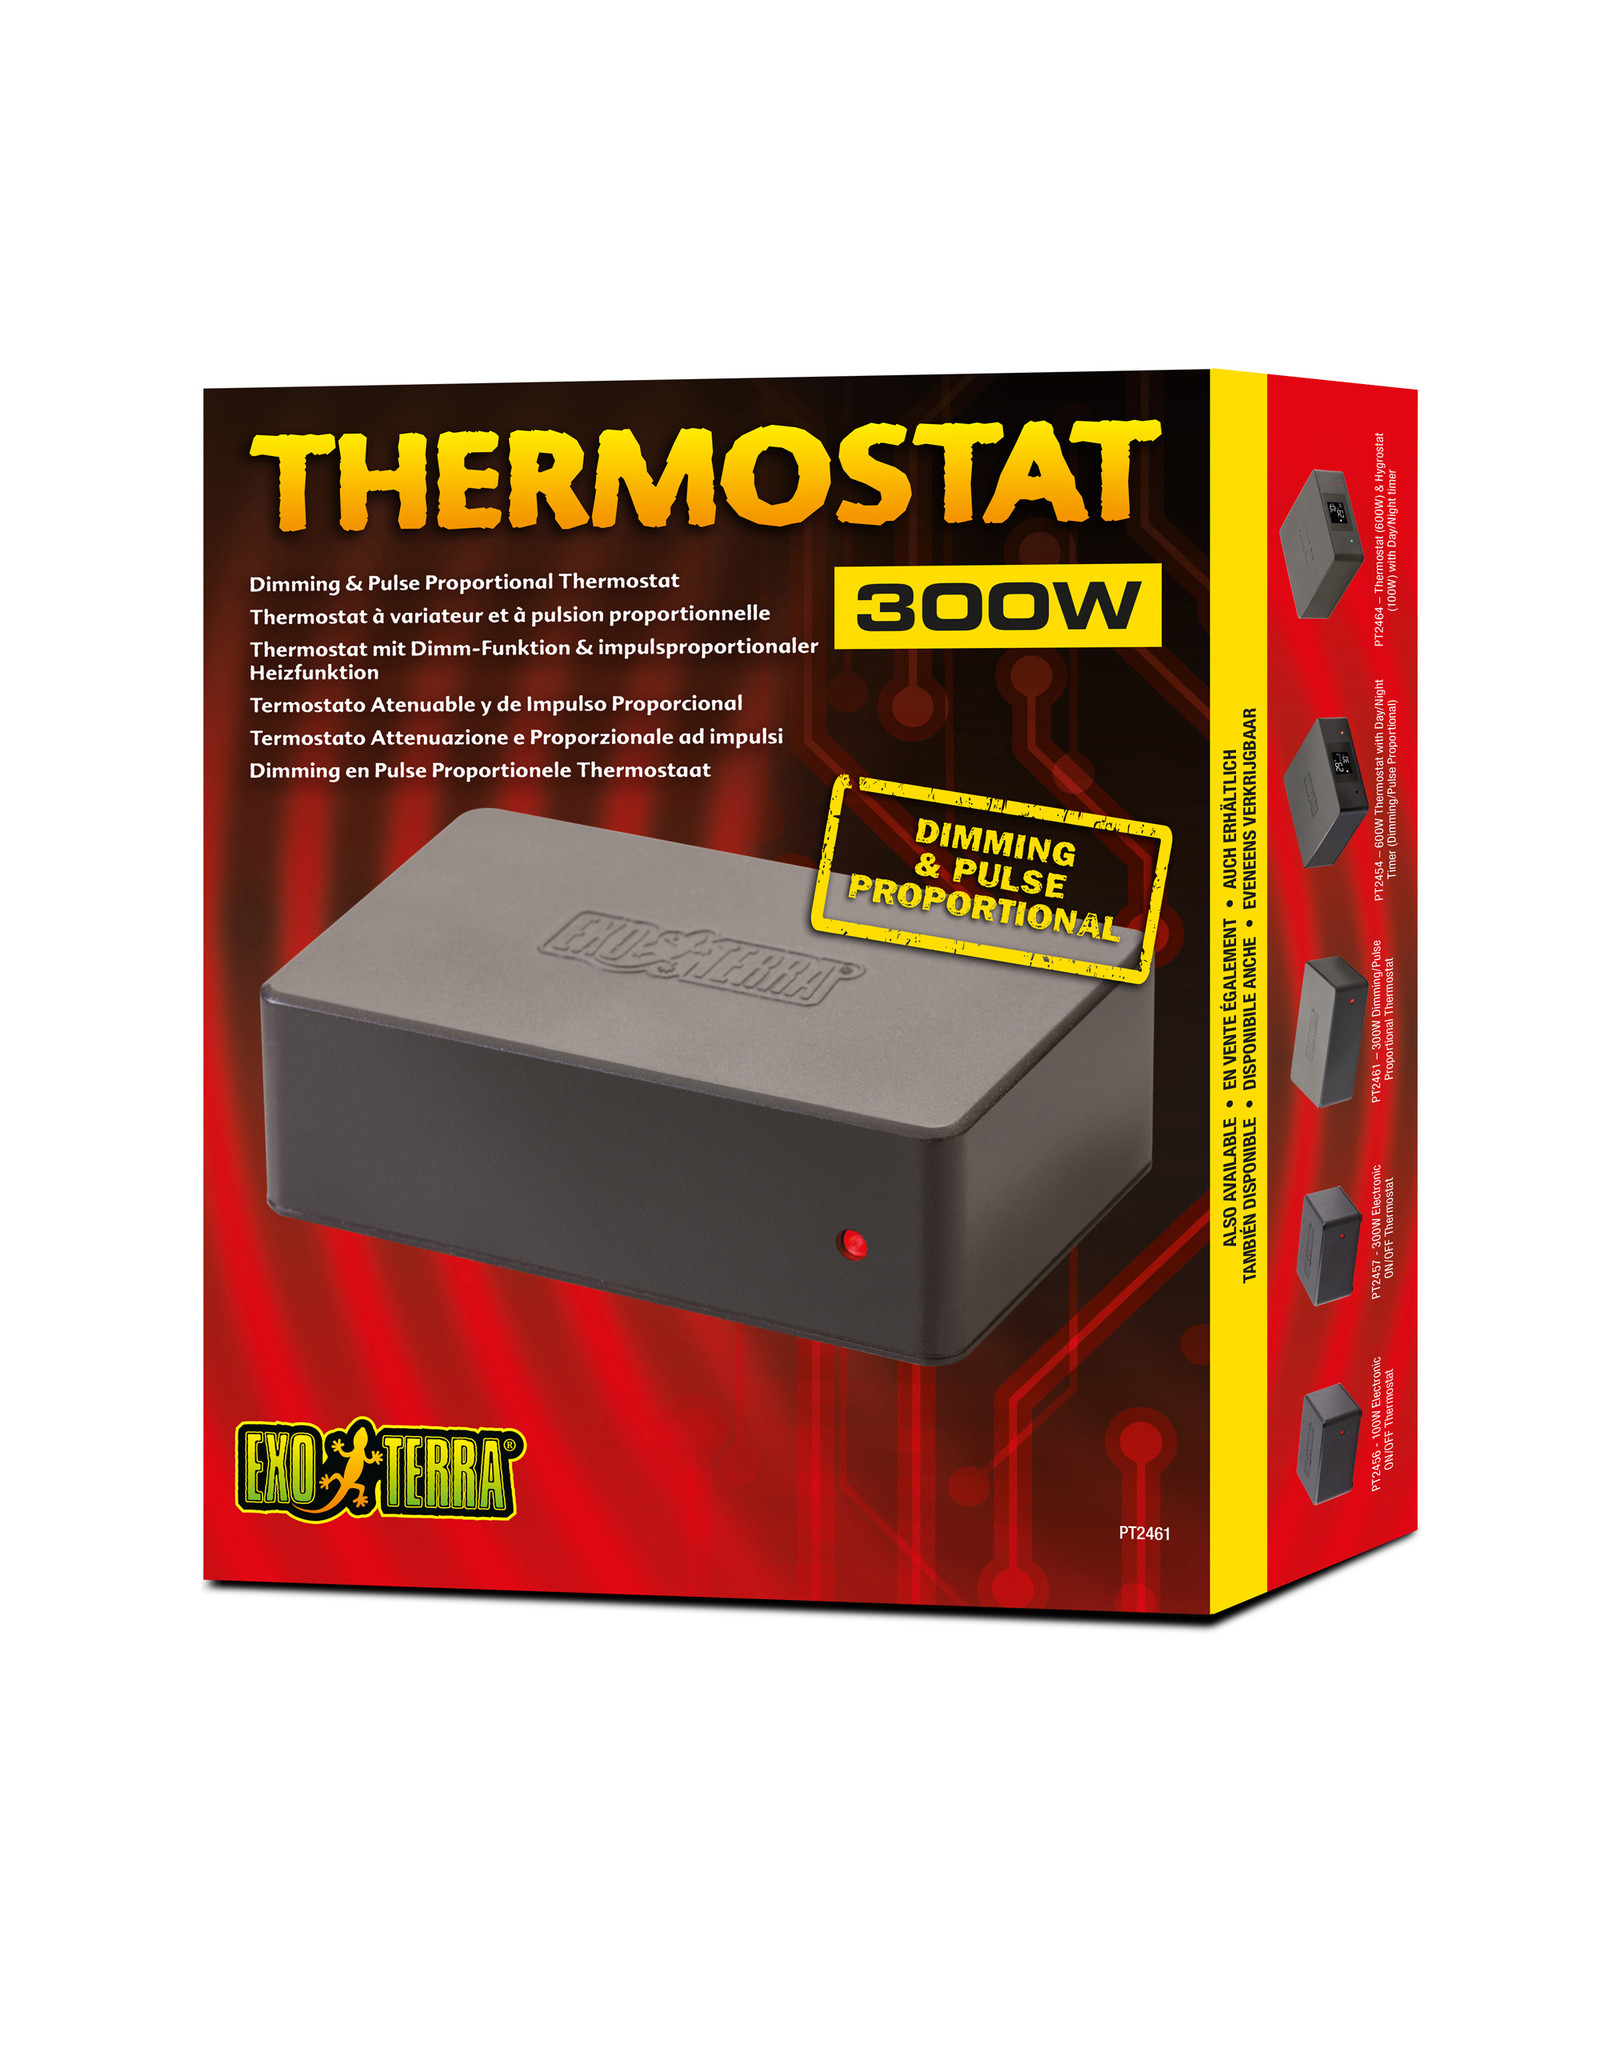 Exo Terra EXO TERRA Thermostat Dimming/Pulse Proportional 300W